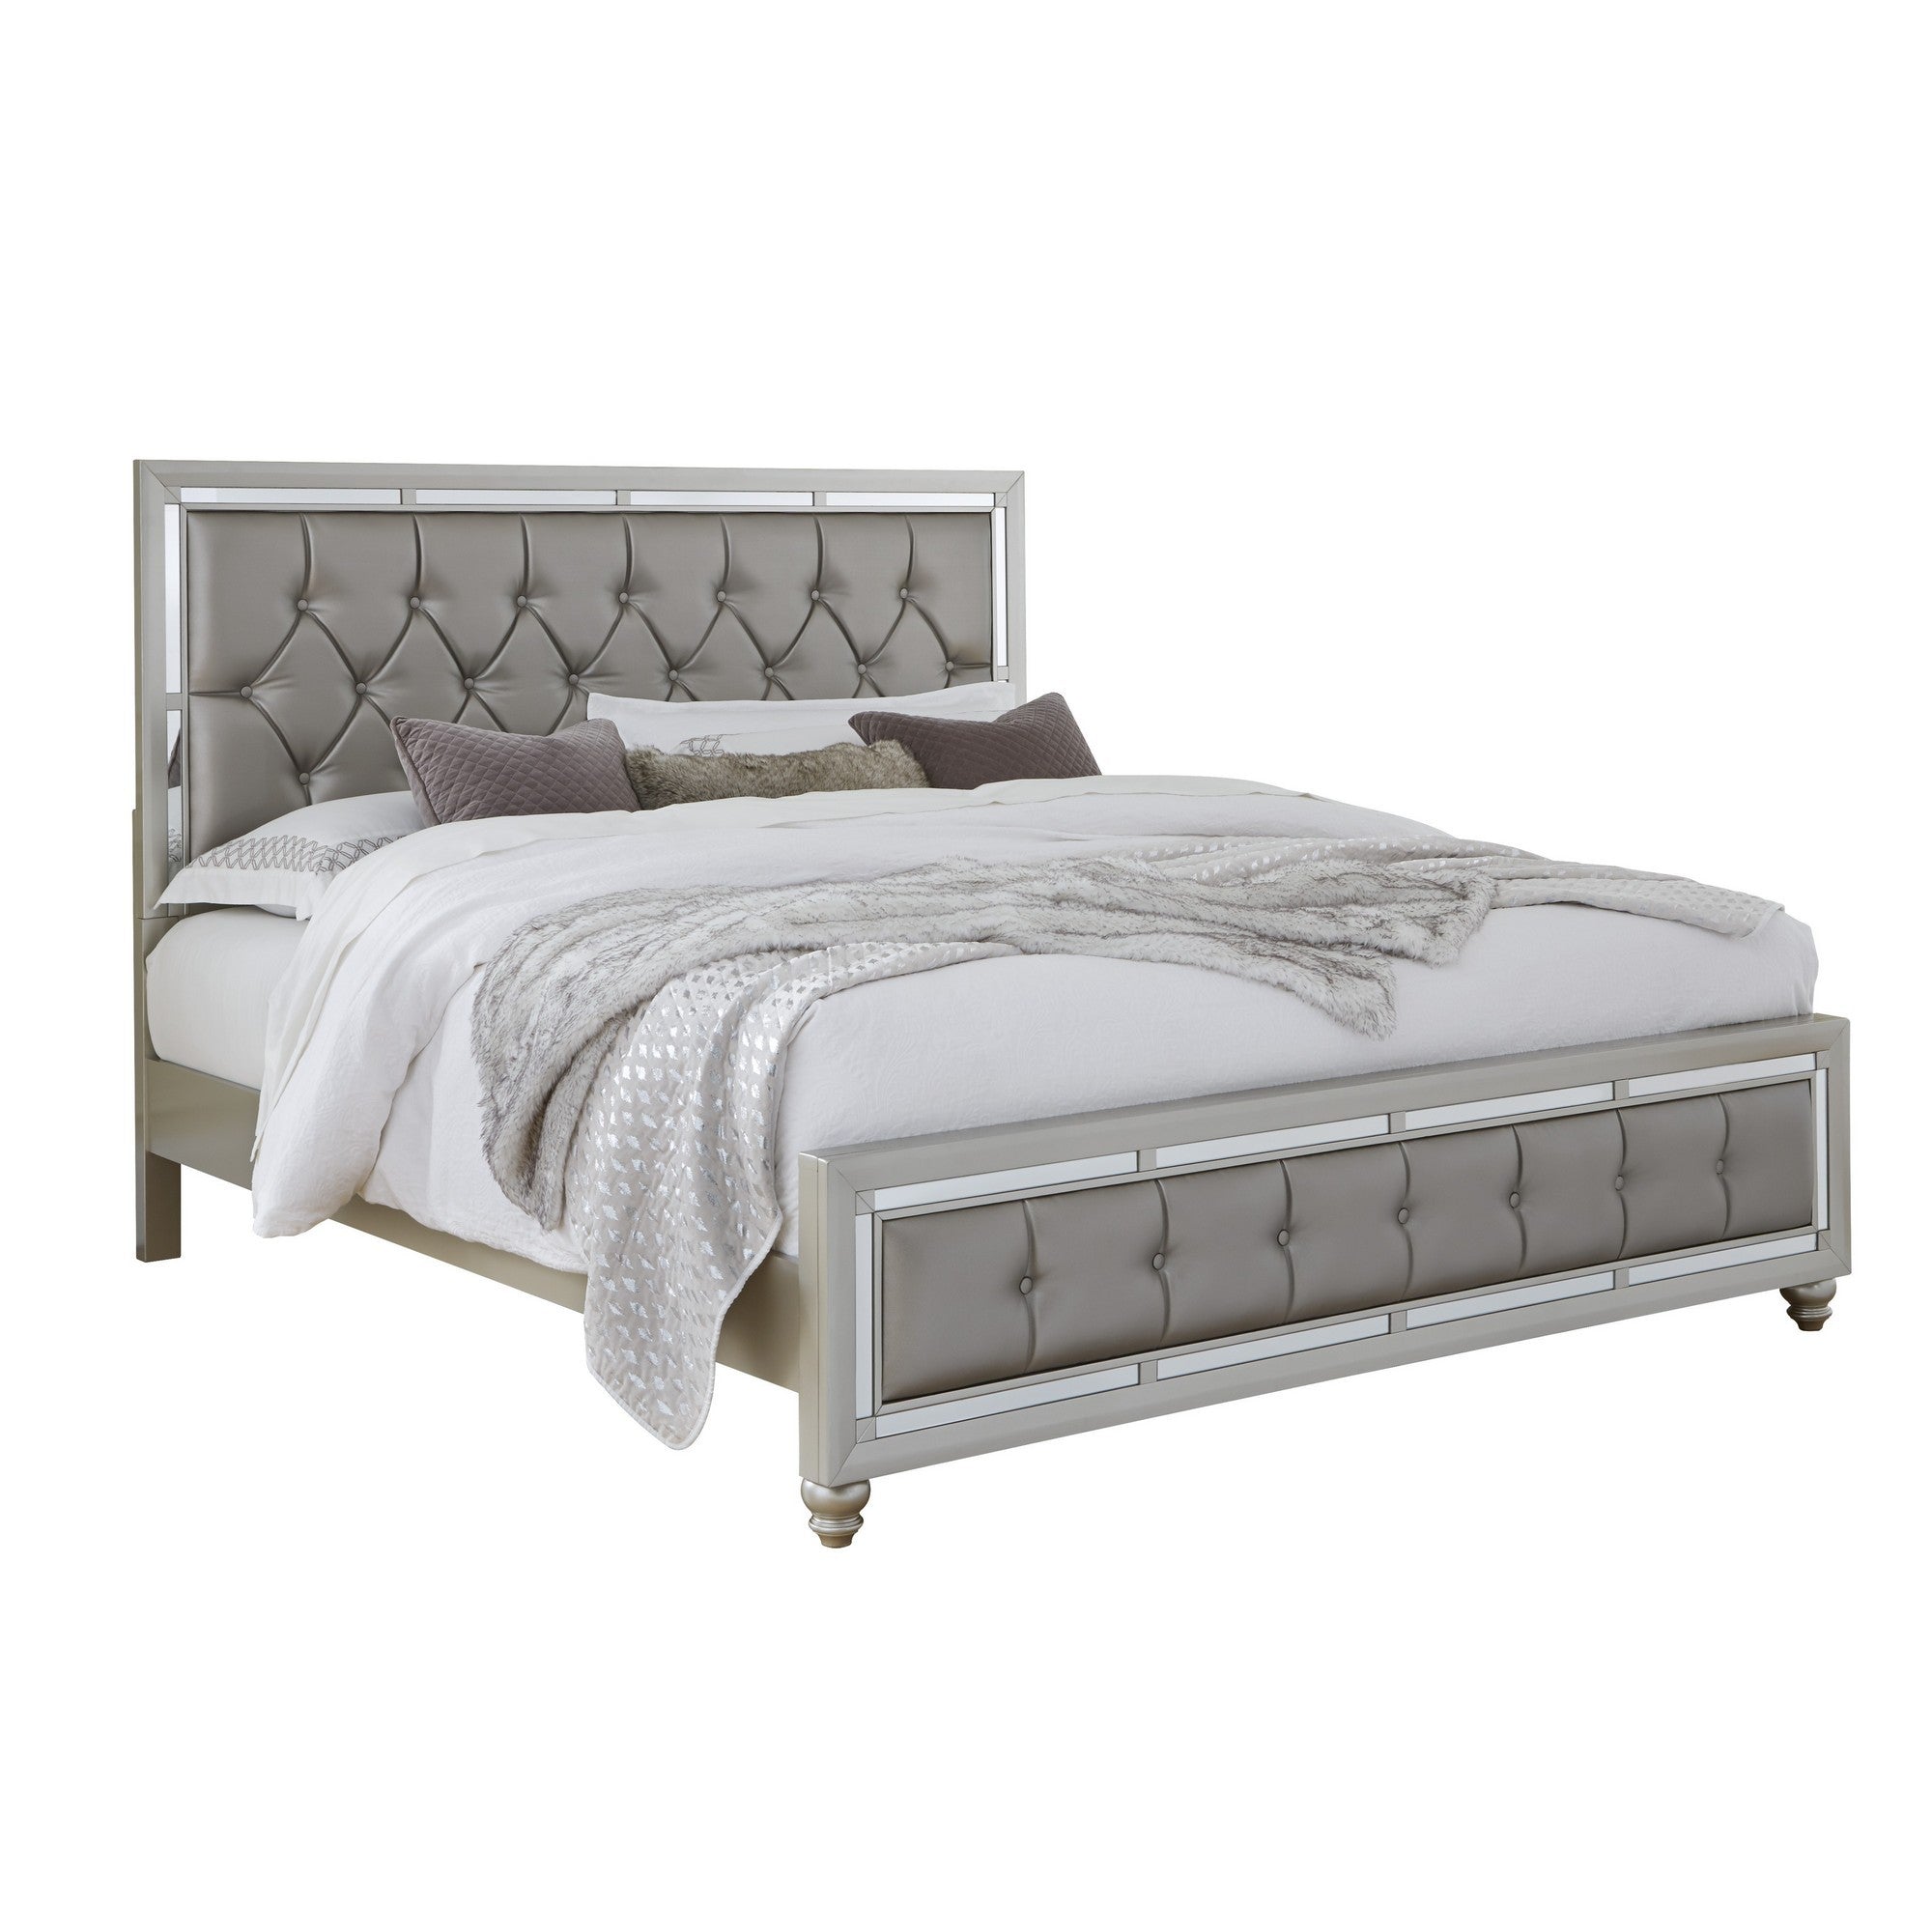 Silver Champagne Tone Full Bed  Padded Headboard  Padded Footboard  Mirror Trim Accents Default Title